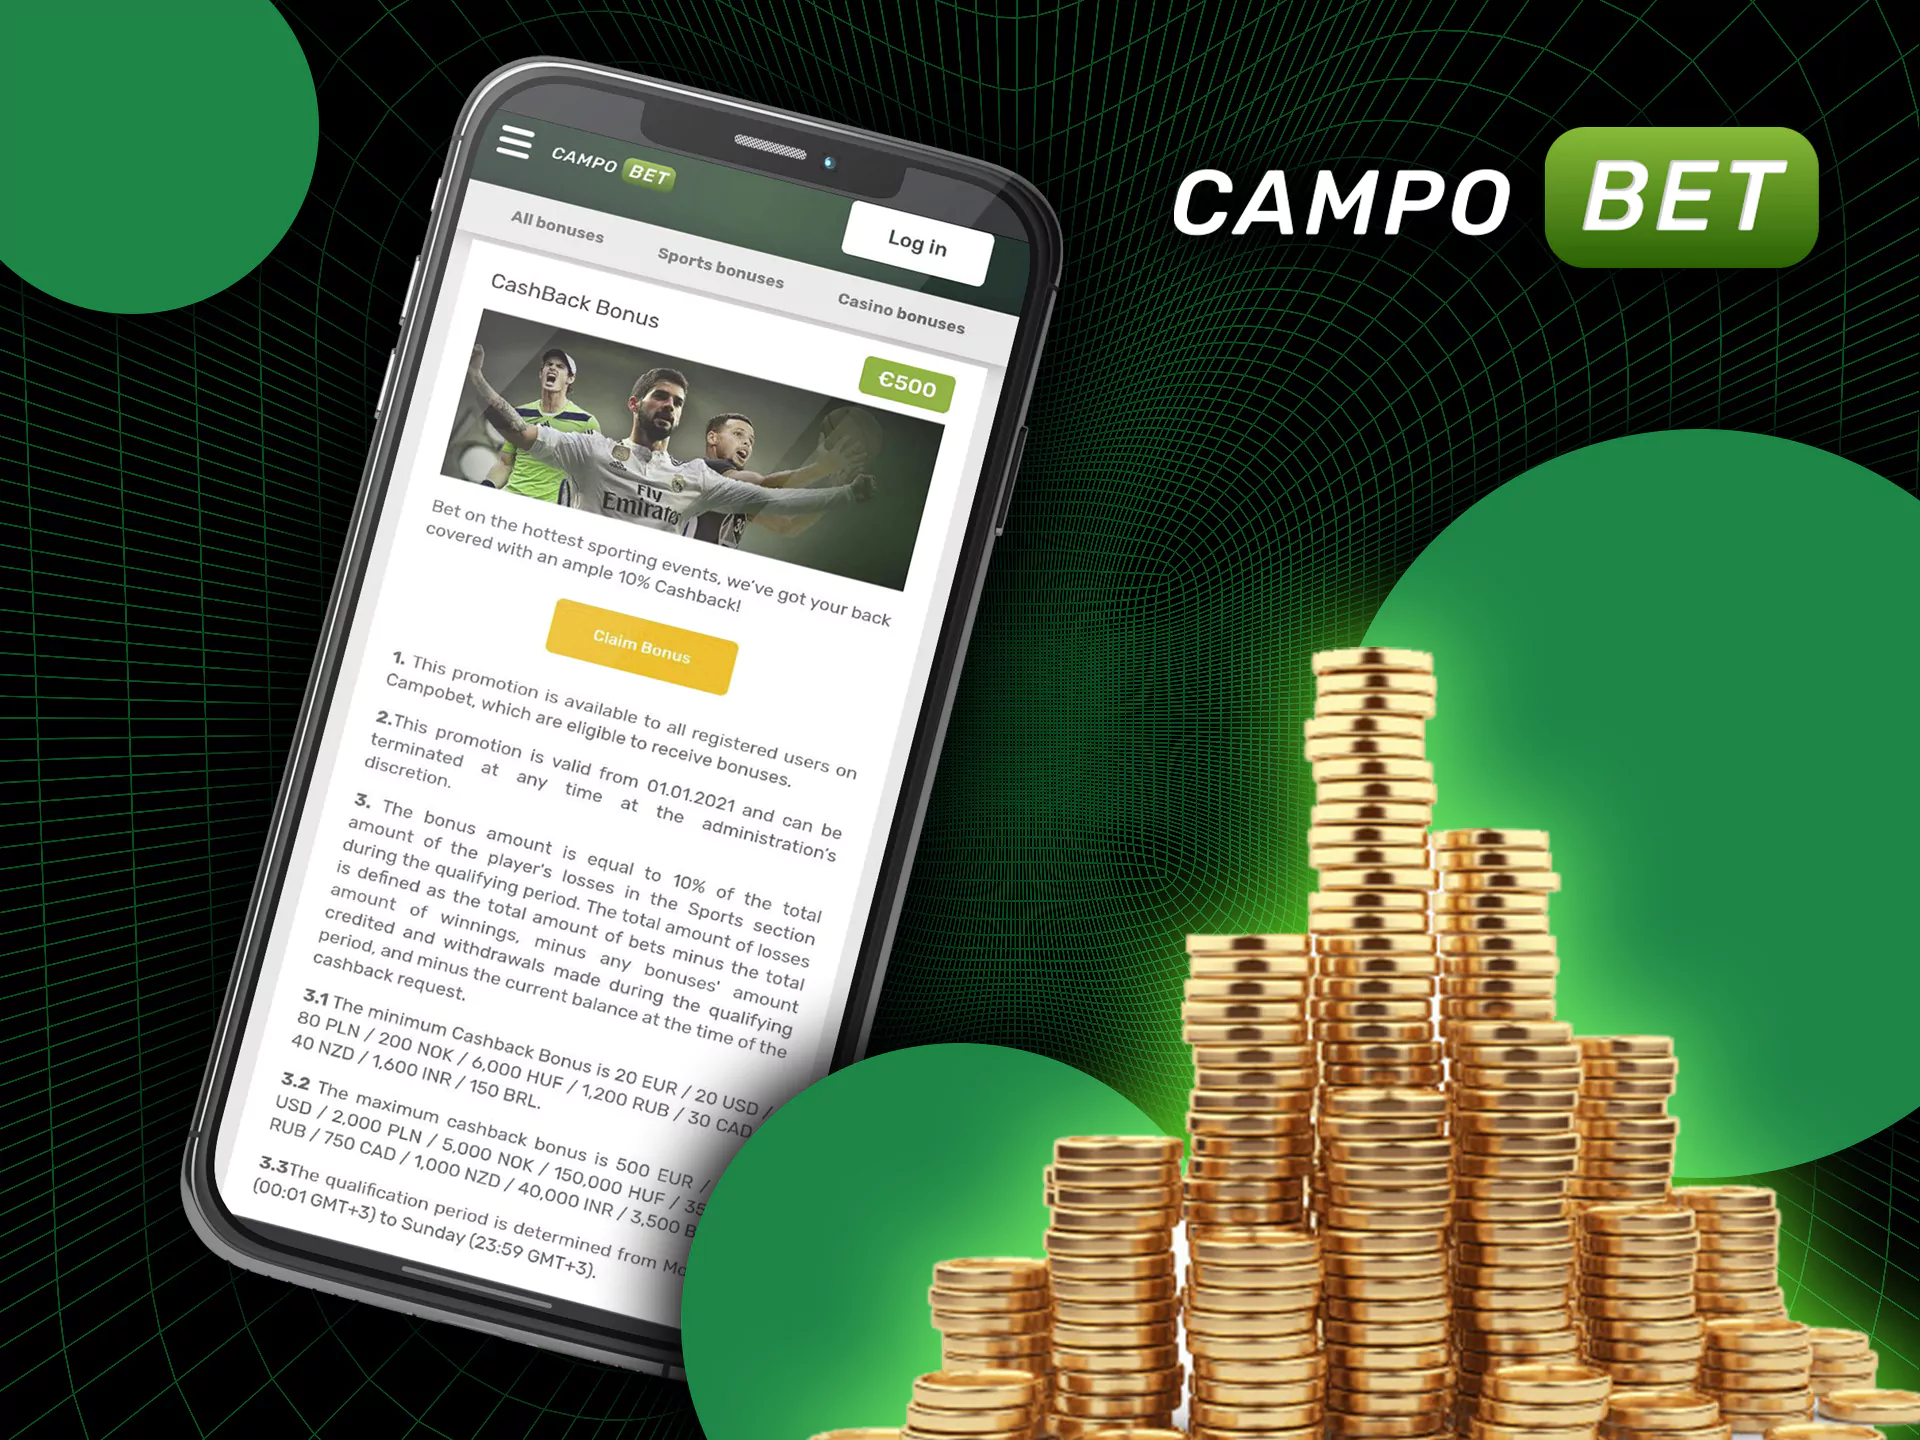 If you bet on Campobet regularly you can get a cashback.